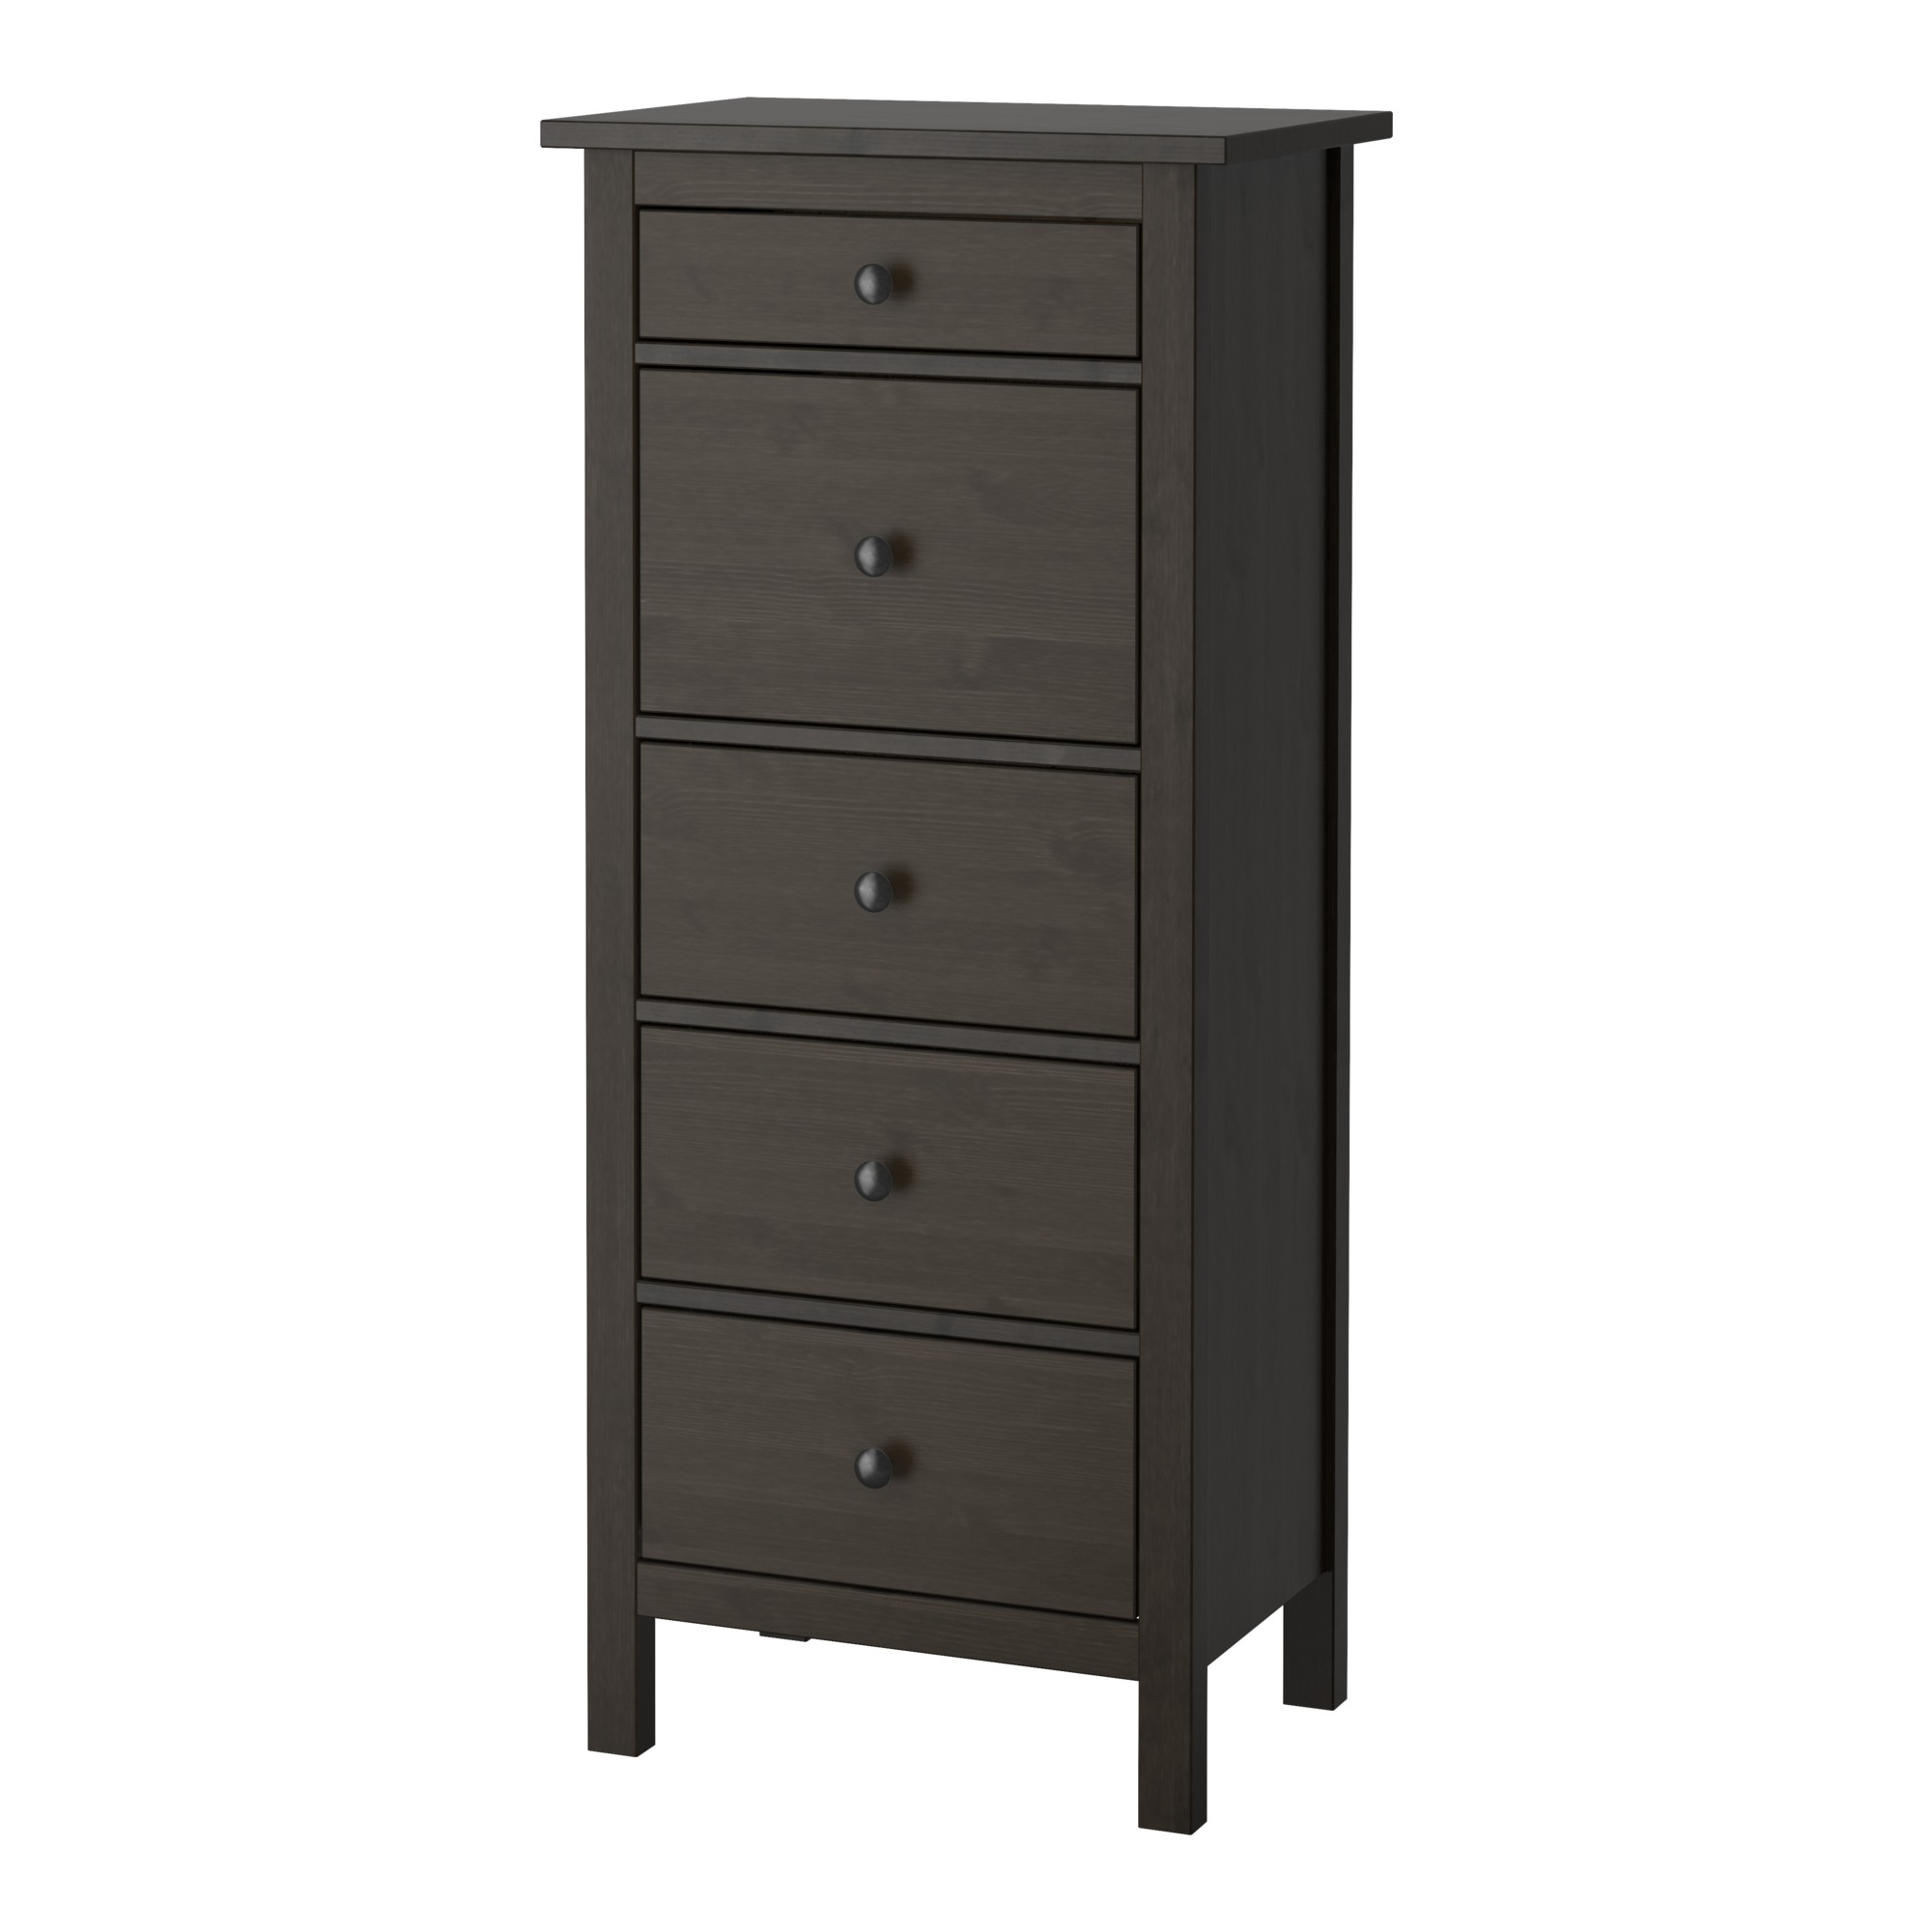 chest of drawers ikea hemnes chest of 5 drawers made of solid wood, which is a SPKDQBC